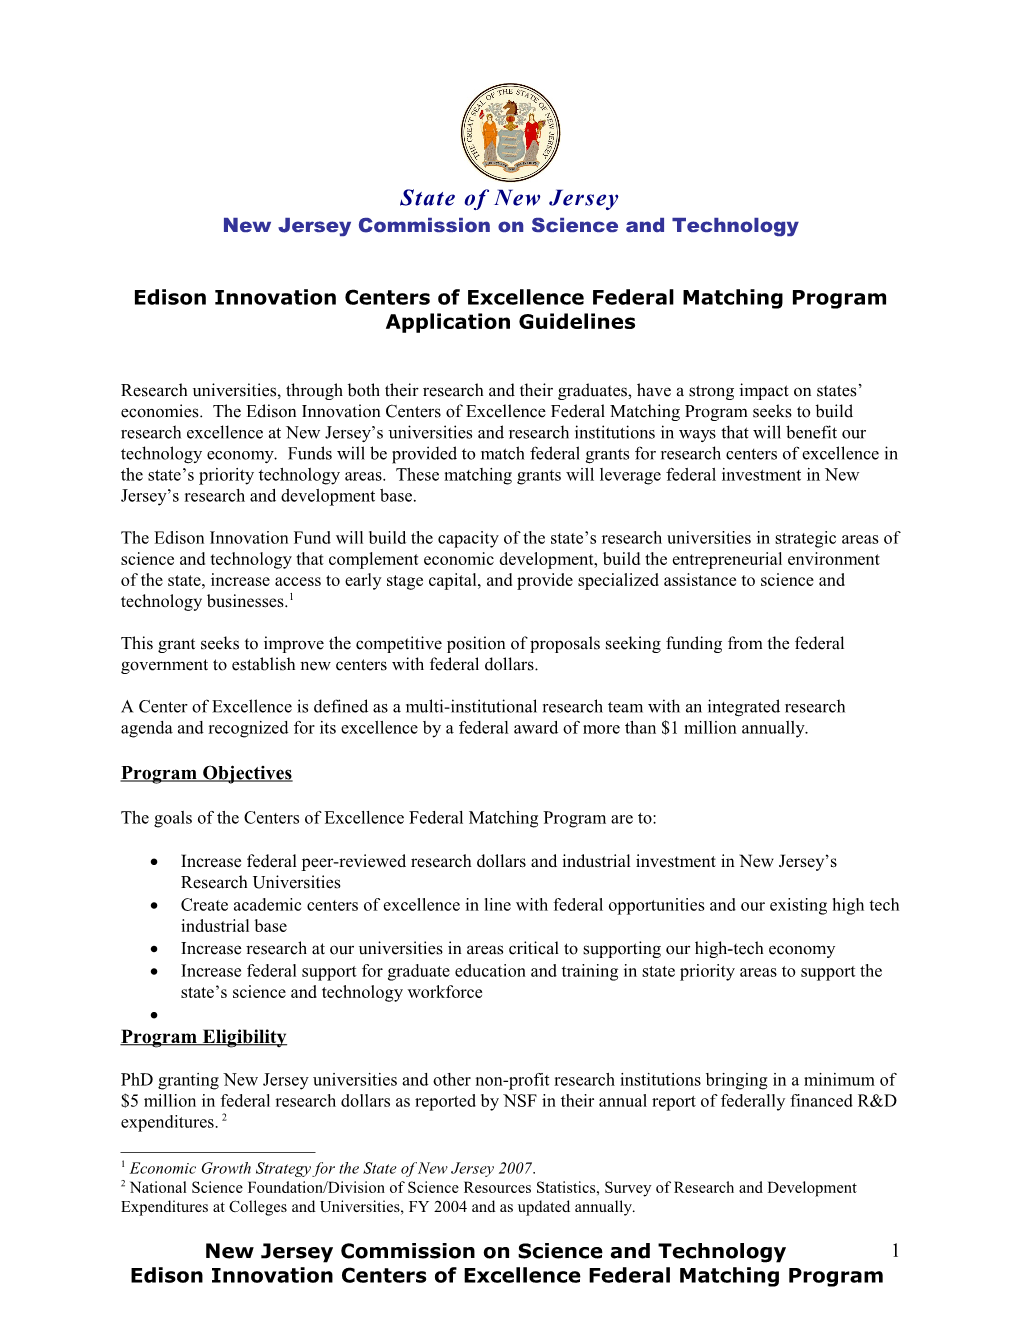 New Jersey Centers of Excellence Federal Matching Program